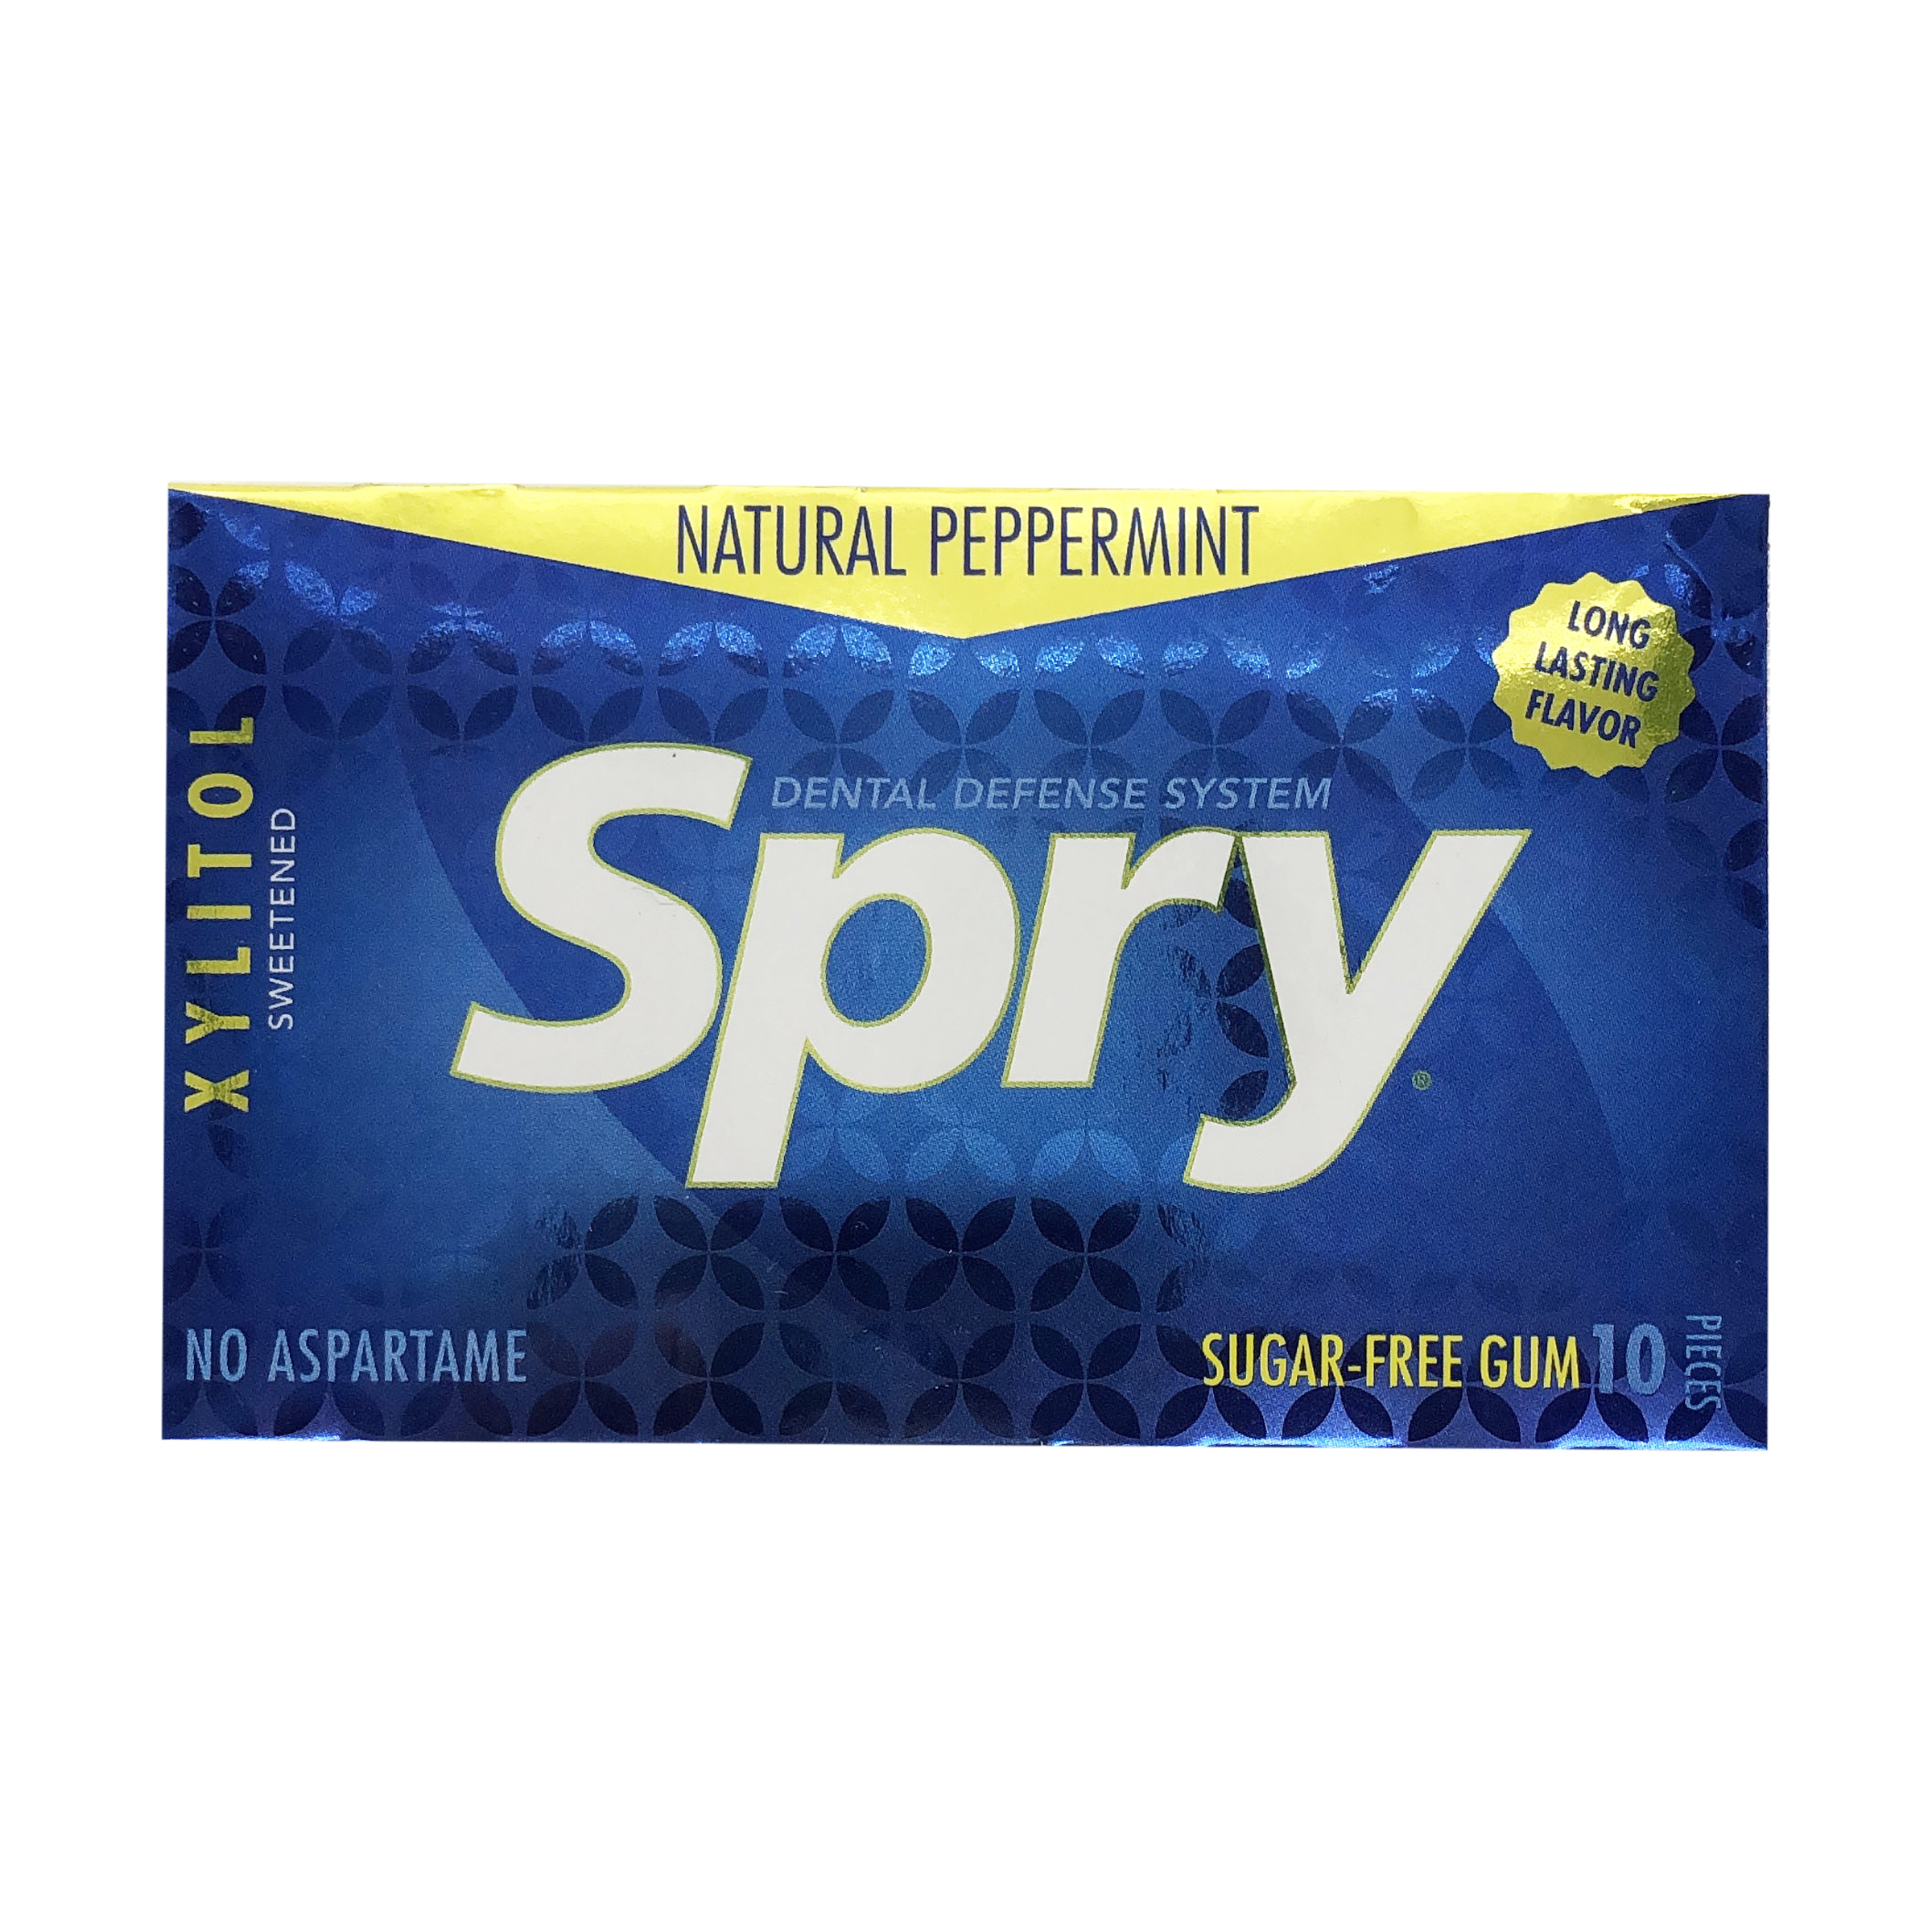 Sugarfree Peppermint Chewing Gum 10 Pieces Spry Whole Foods Market